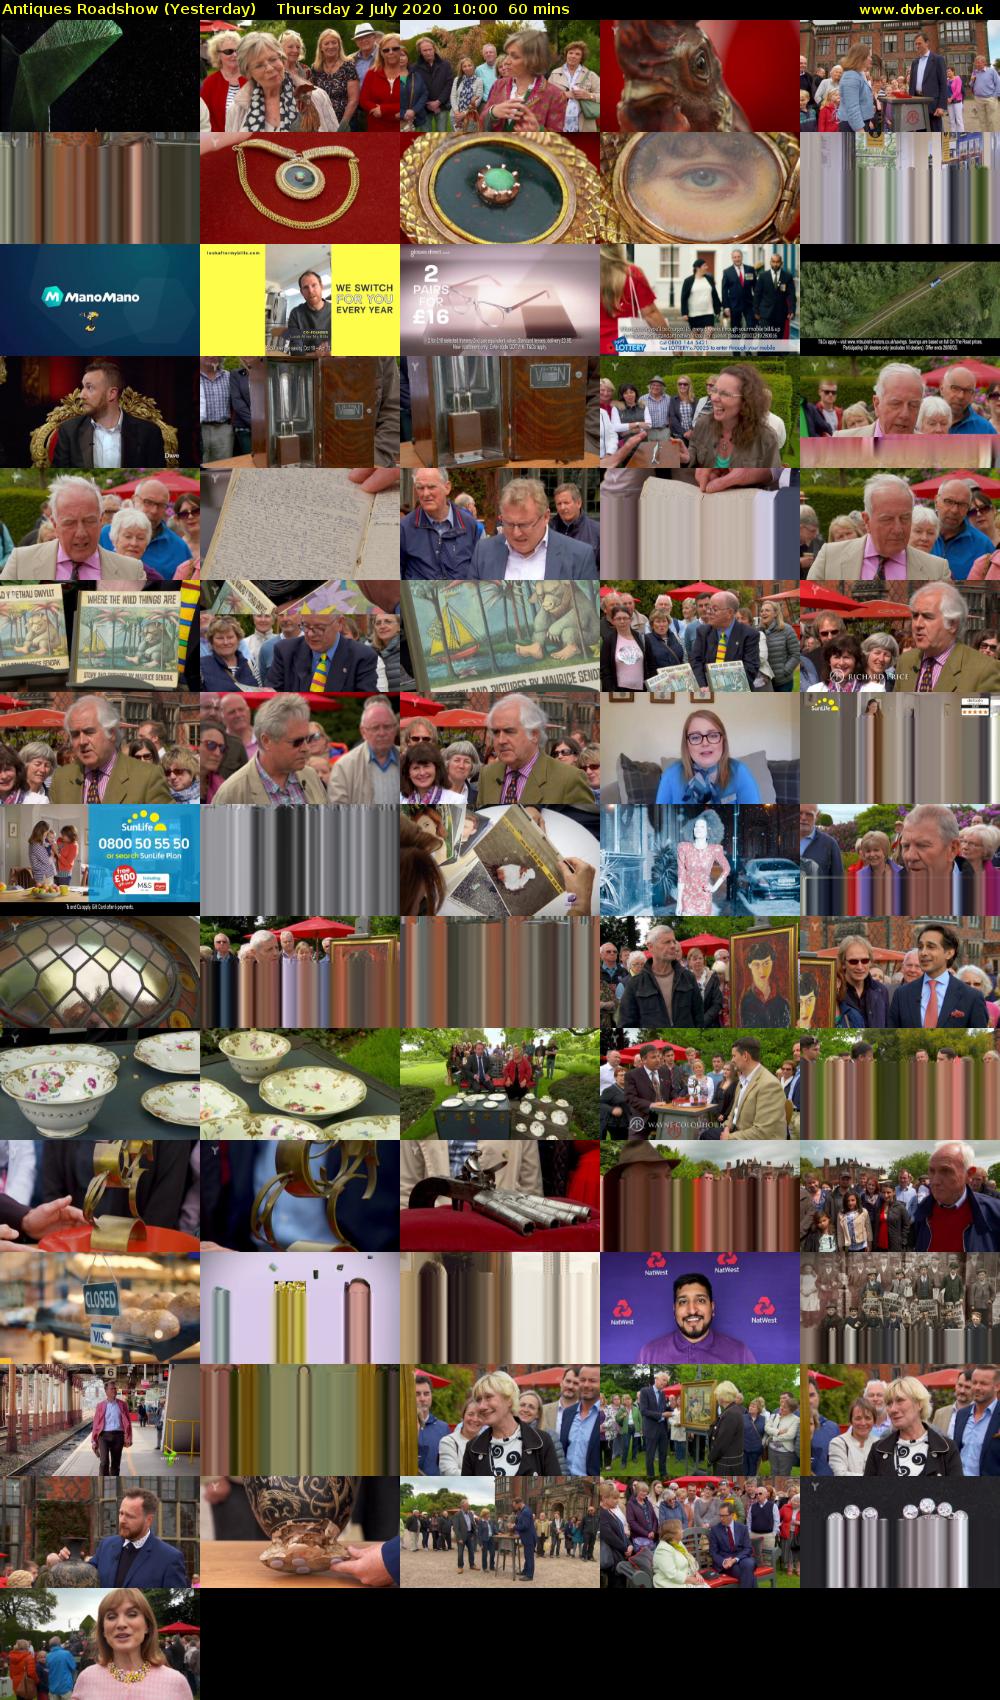 Antiques Roadshow (Yesterday) Thursday 2 July 2020 10:00 - 11:00